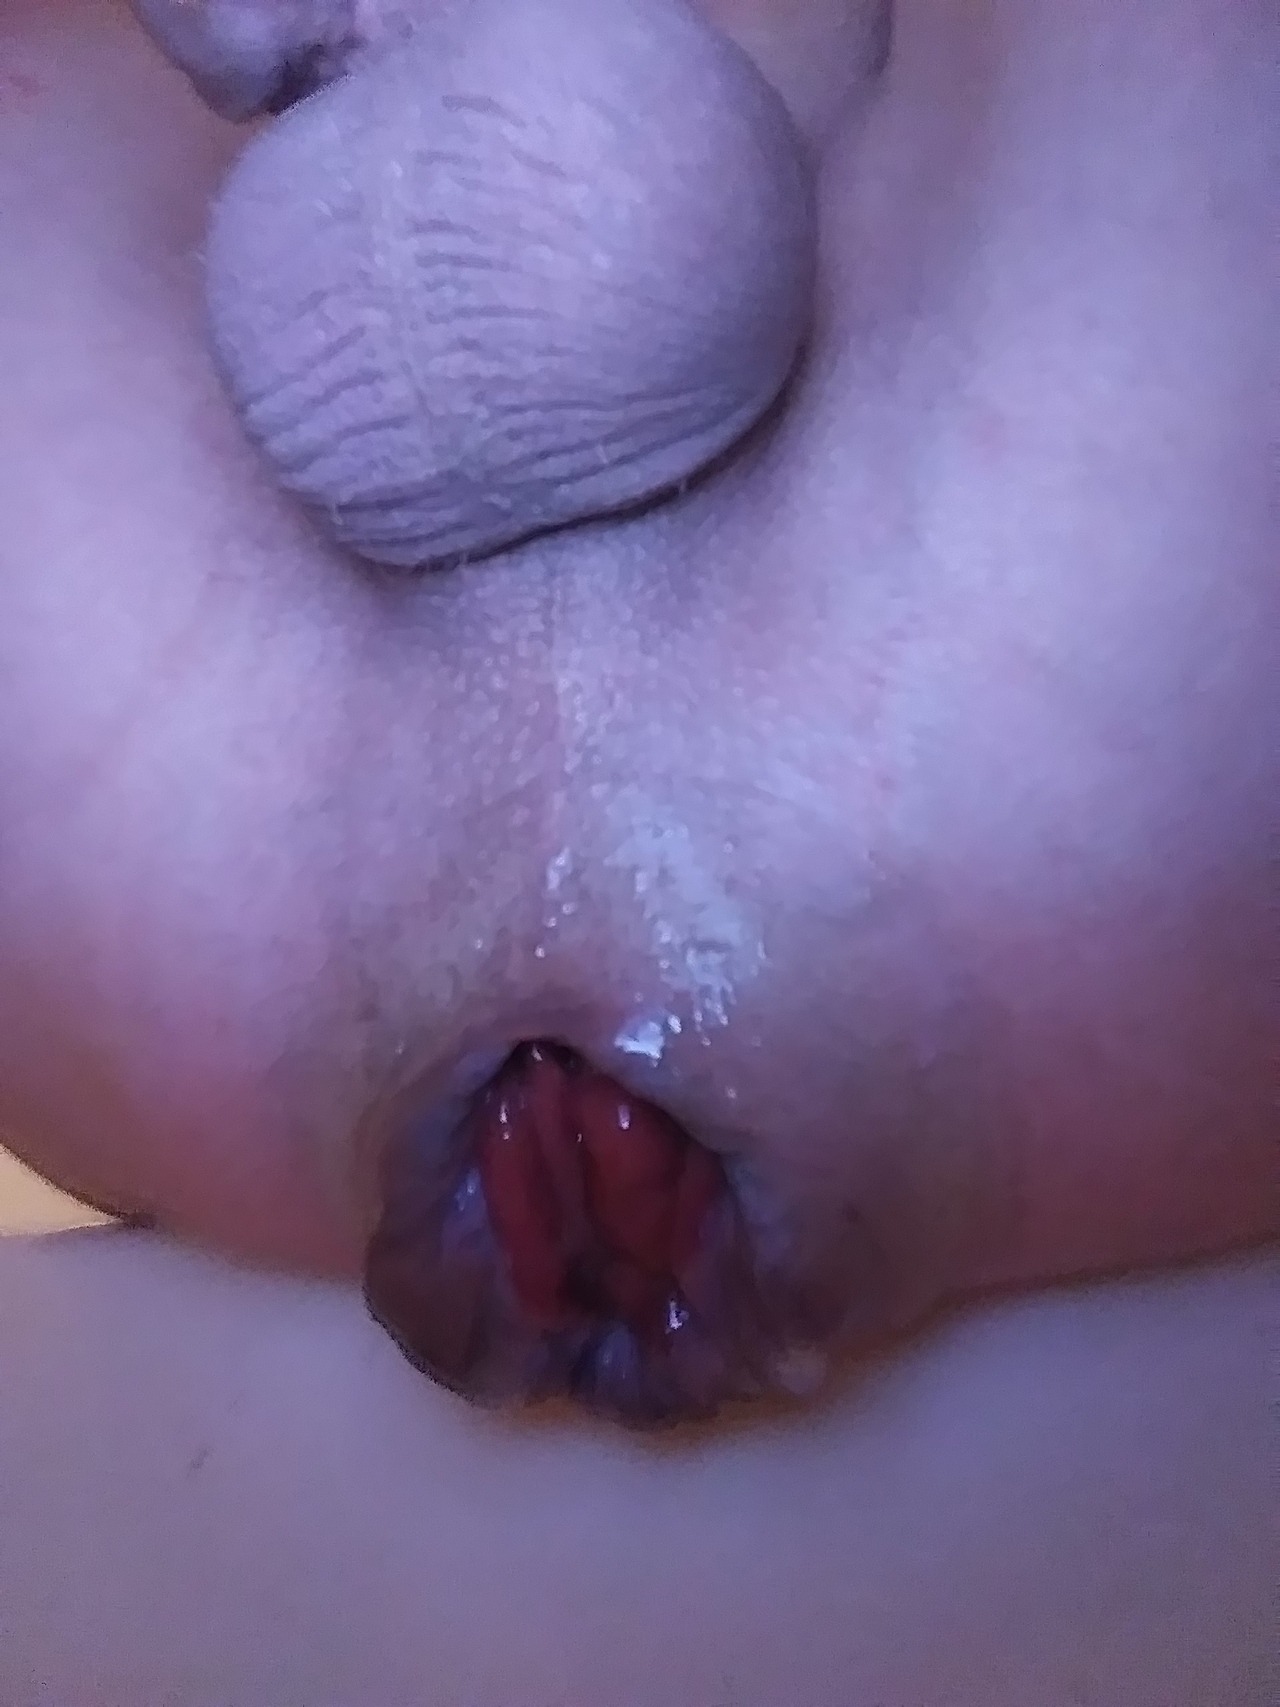 johnybtex74:Two more. Once with equine dildo and one swollen gape. Enjoy.